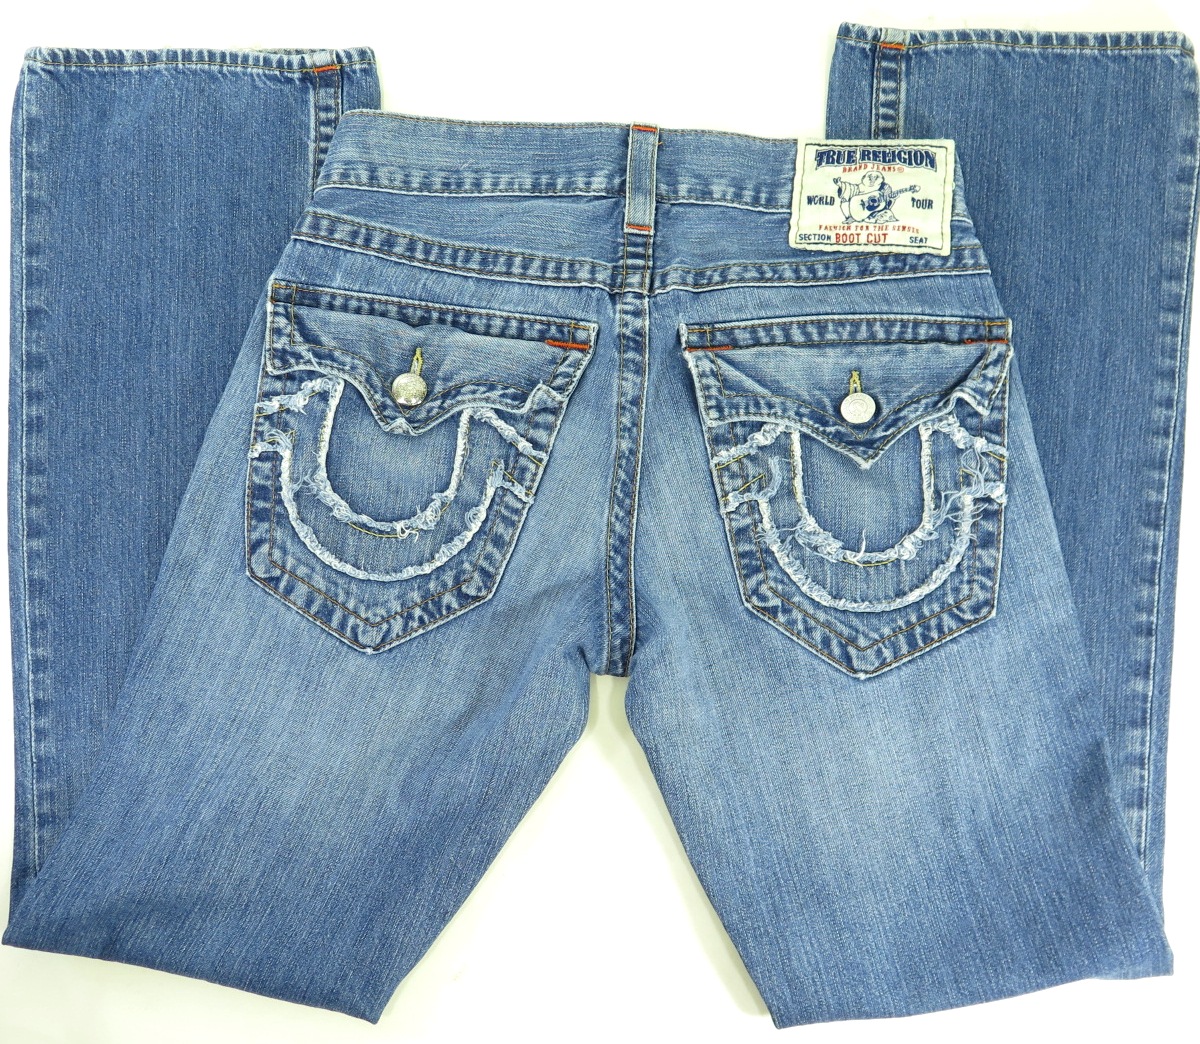 Buy > true religion low rise bootcut jeans > in stock